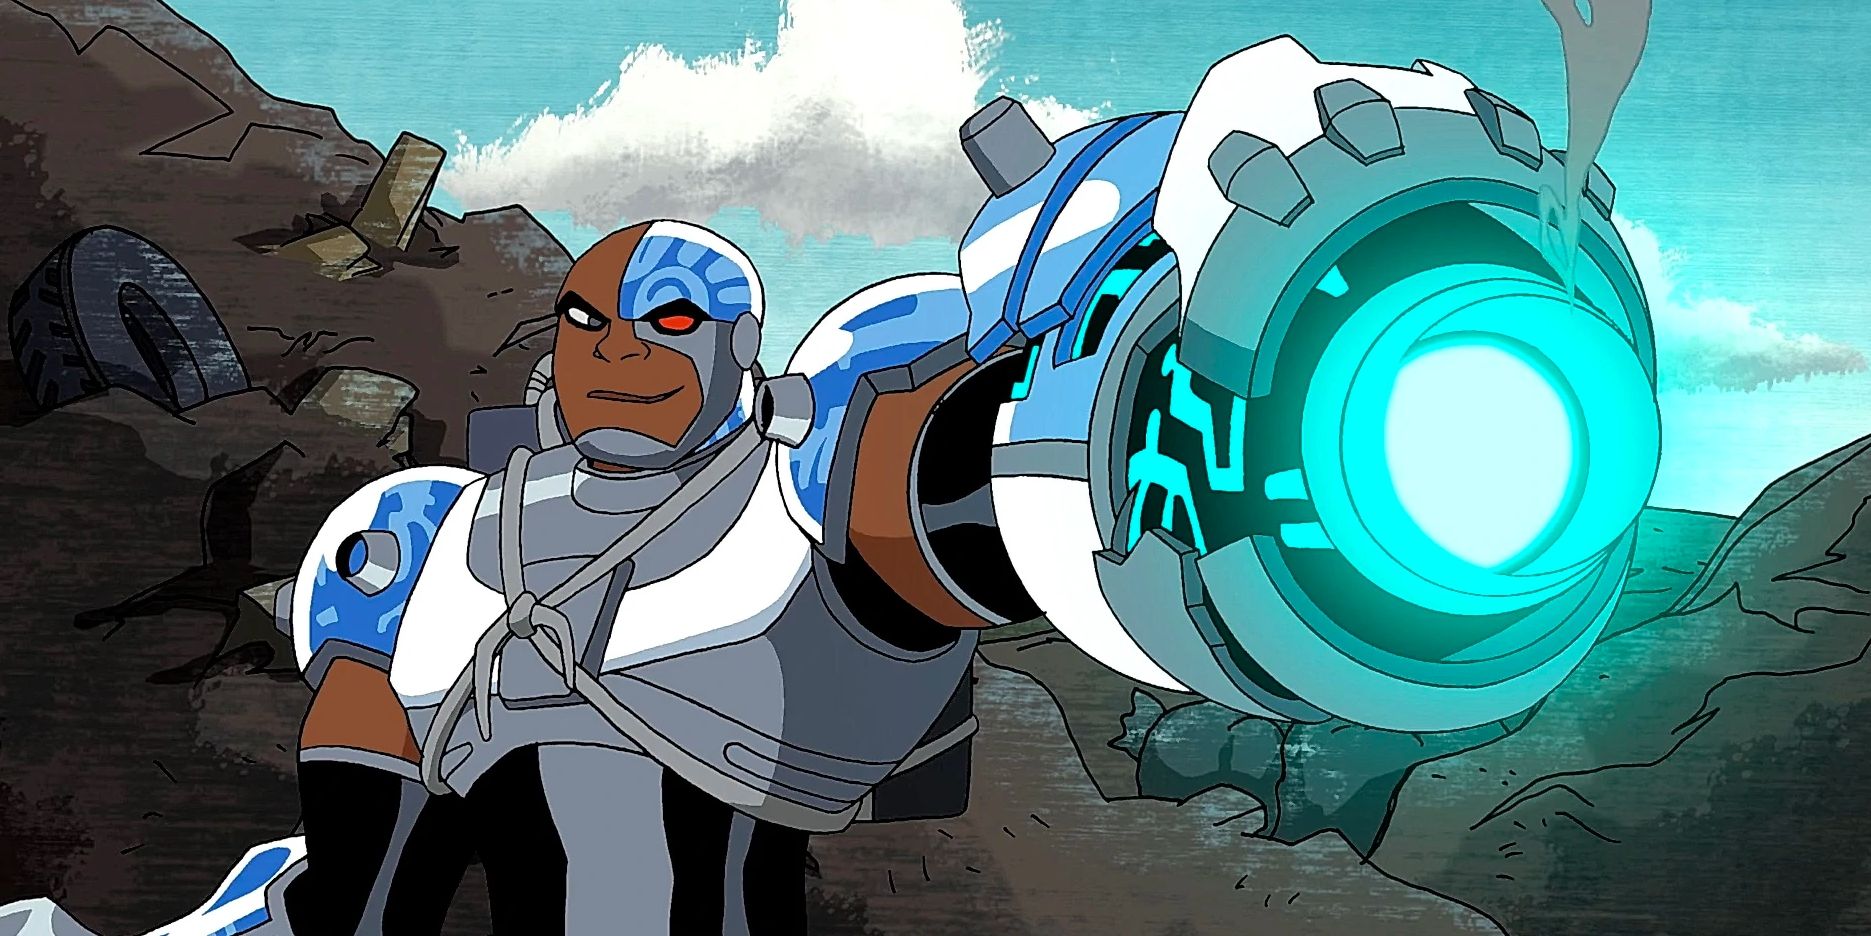 Cyborg smiling and aiming his blaster in Teen Titans.